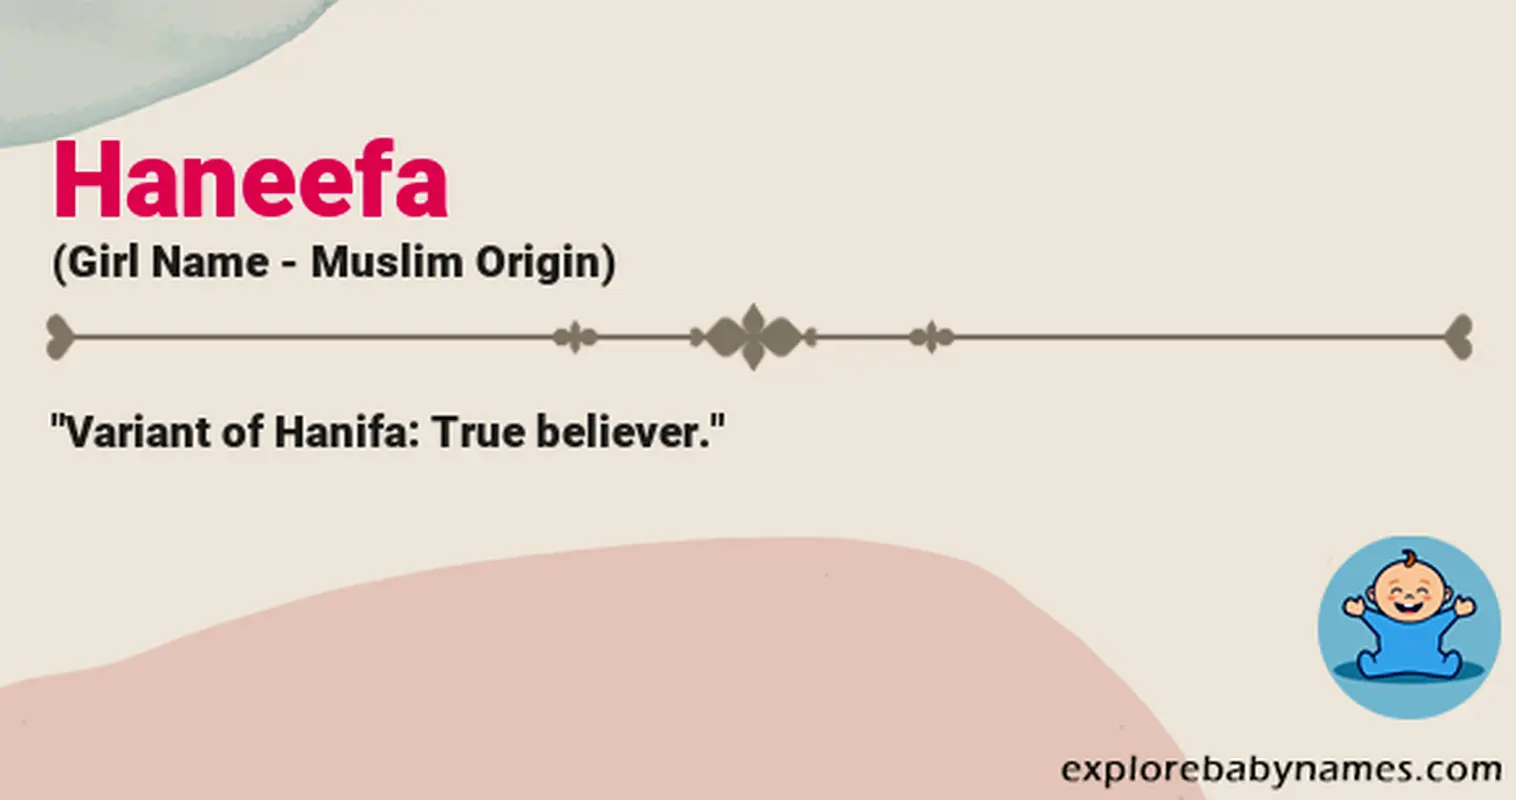 Meaning of Haneefa